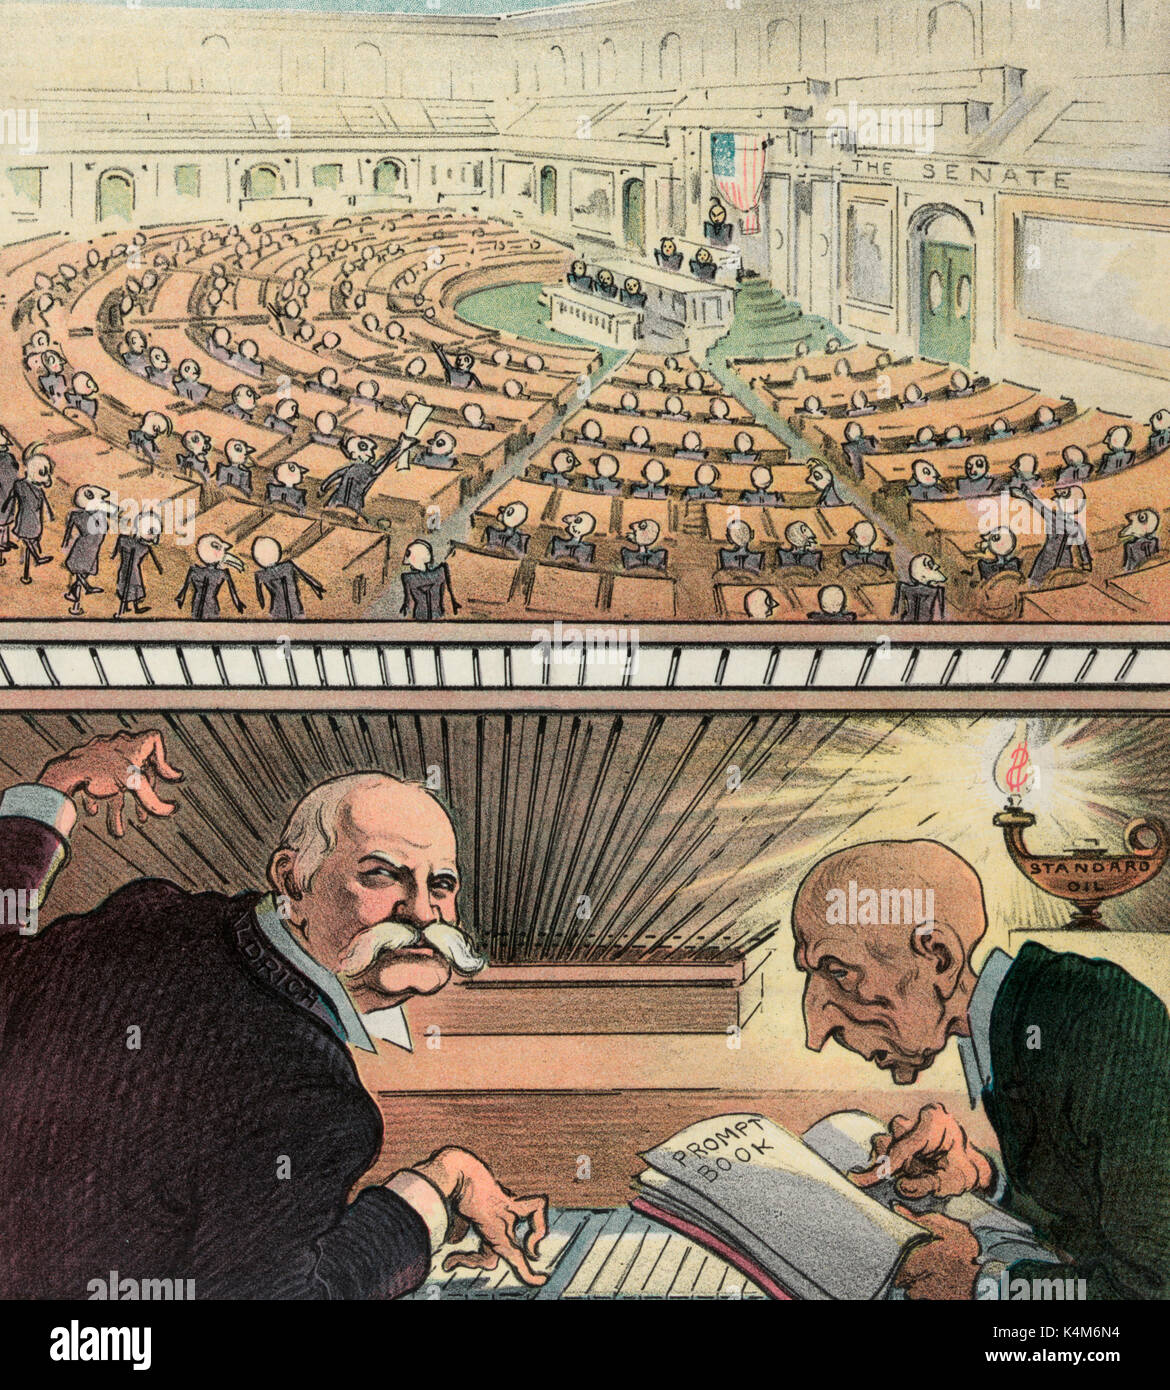 At the keyboard - Illustration shows Nelson Aldrich and J.D. Rockefeller sitting at a keyboard overlooking Congress in session at the U.S. Capitol; Rockefeller is holding a 'Prompt Book' as Aldrich plays the instrument; they are illuminated by the flame of an oil lamp labeled 'Standard Oil'. Political Cartoon, circa 1905 Stock Photo